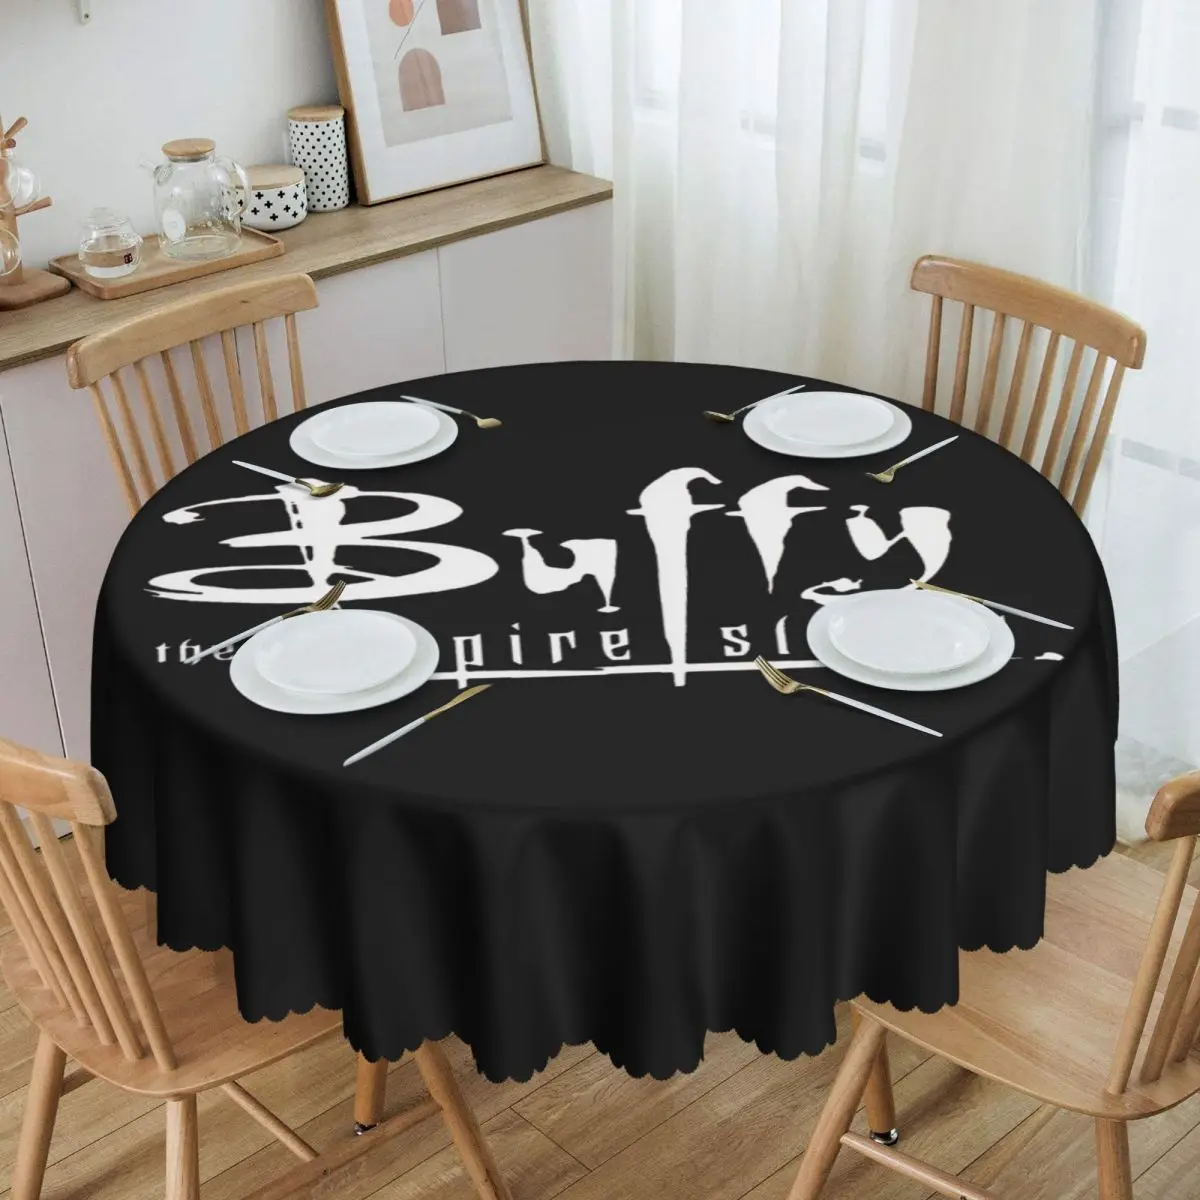 

Round Buffy The Vampire Slayer Logo Table Cloth Oilproof Tablecloth 60 inch Table Cover for Kitchen Dinning